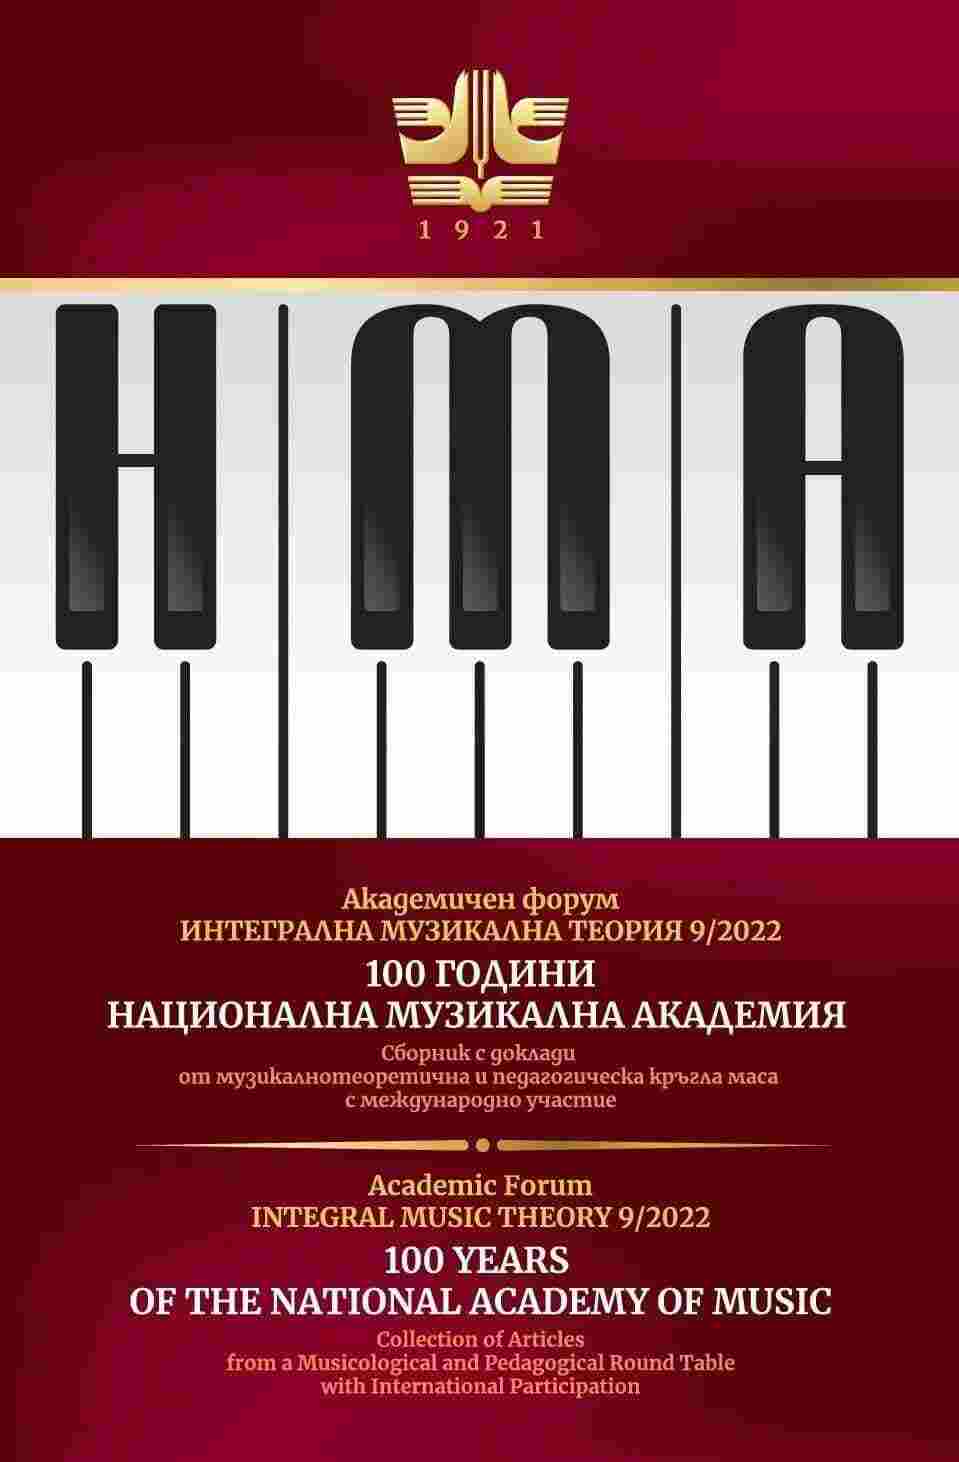 Presentation of the Section of Schools With Profiled and Extended Study of Music in the Republic of Bulgaria at the European Music Association (SUPRIM at EMU) and Its Cooperation With the Universities for the Development of Art in Bulgaria Cover Image